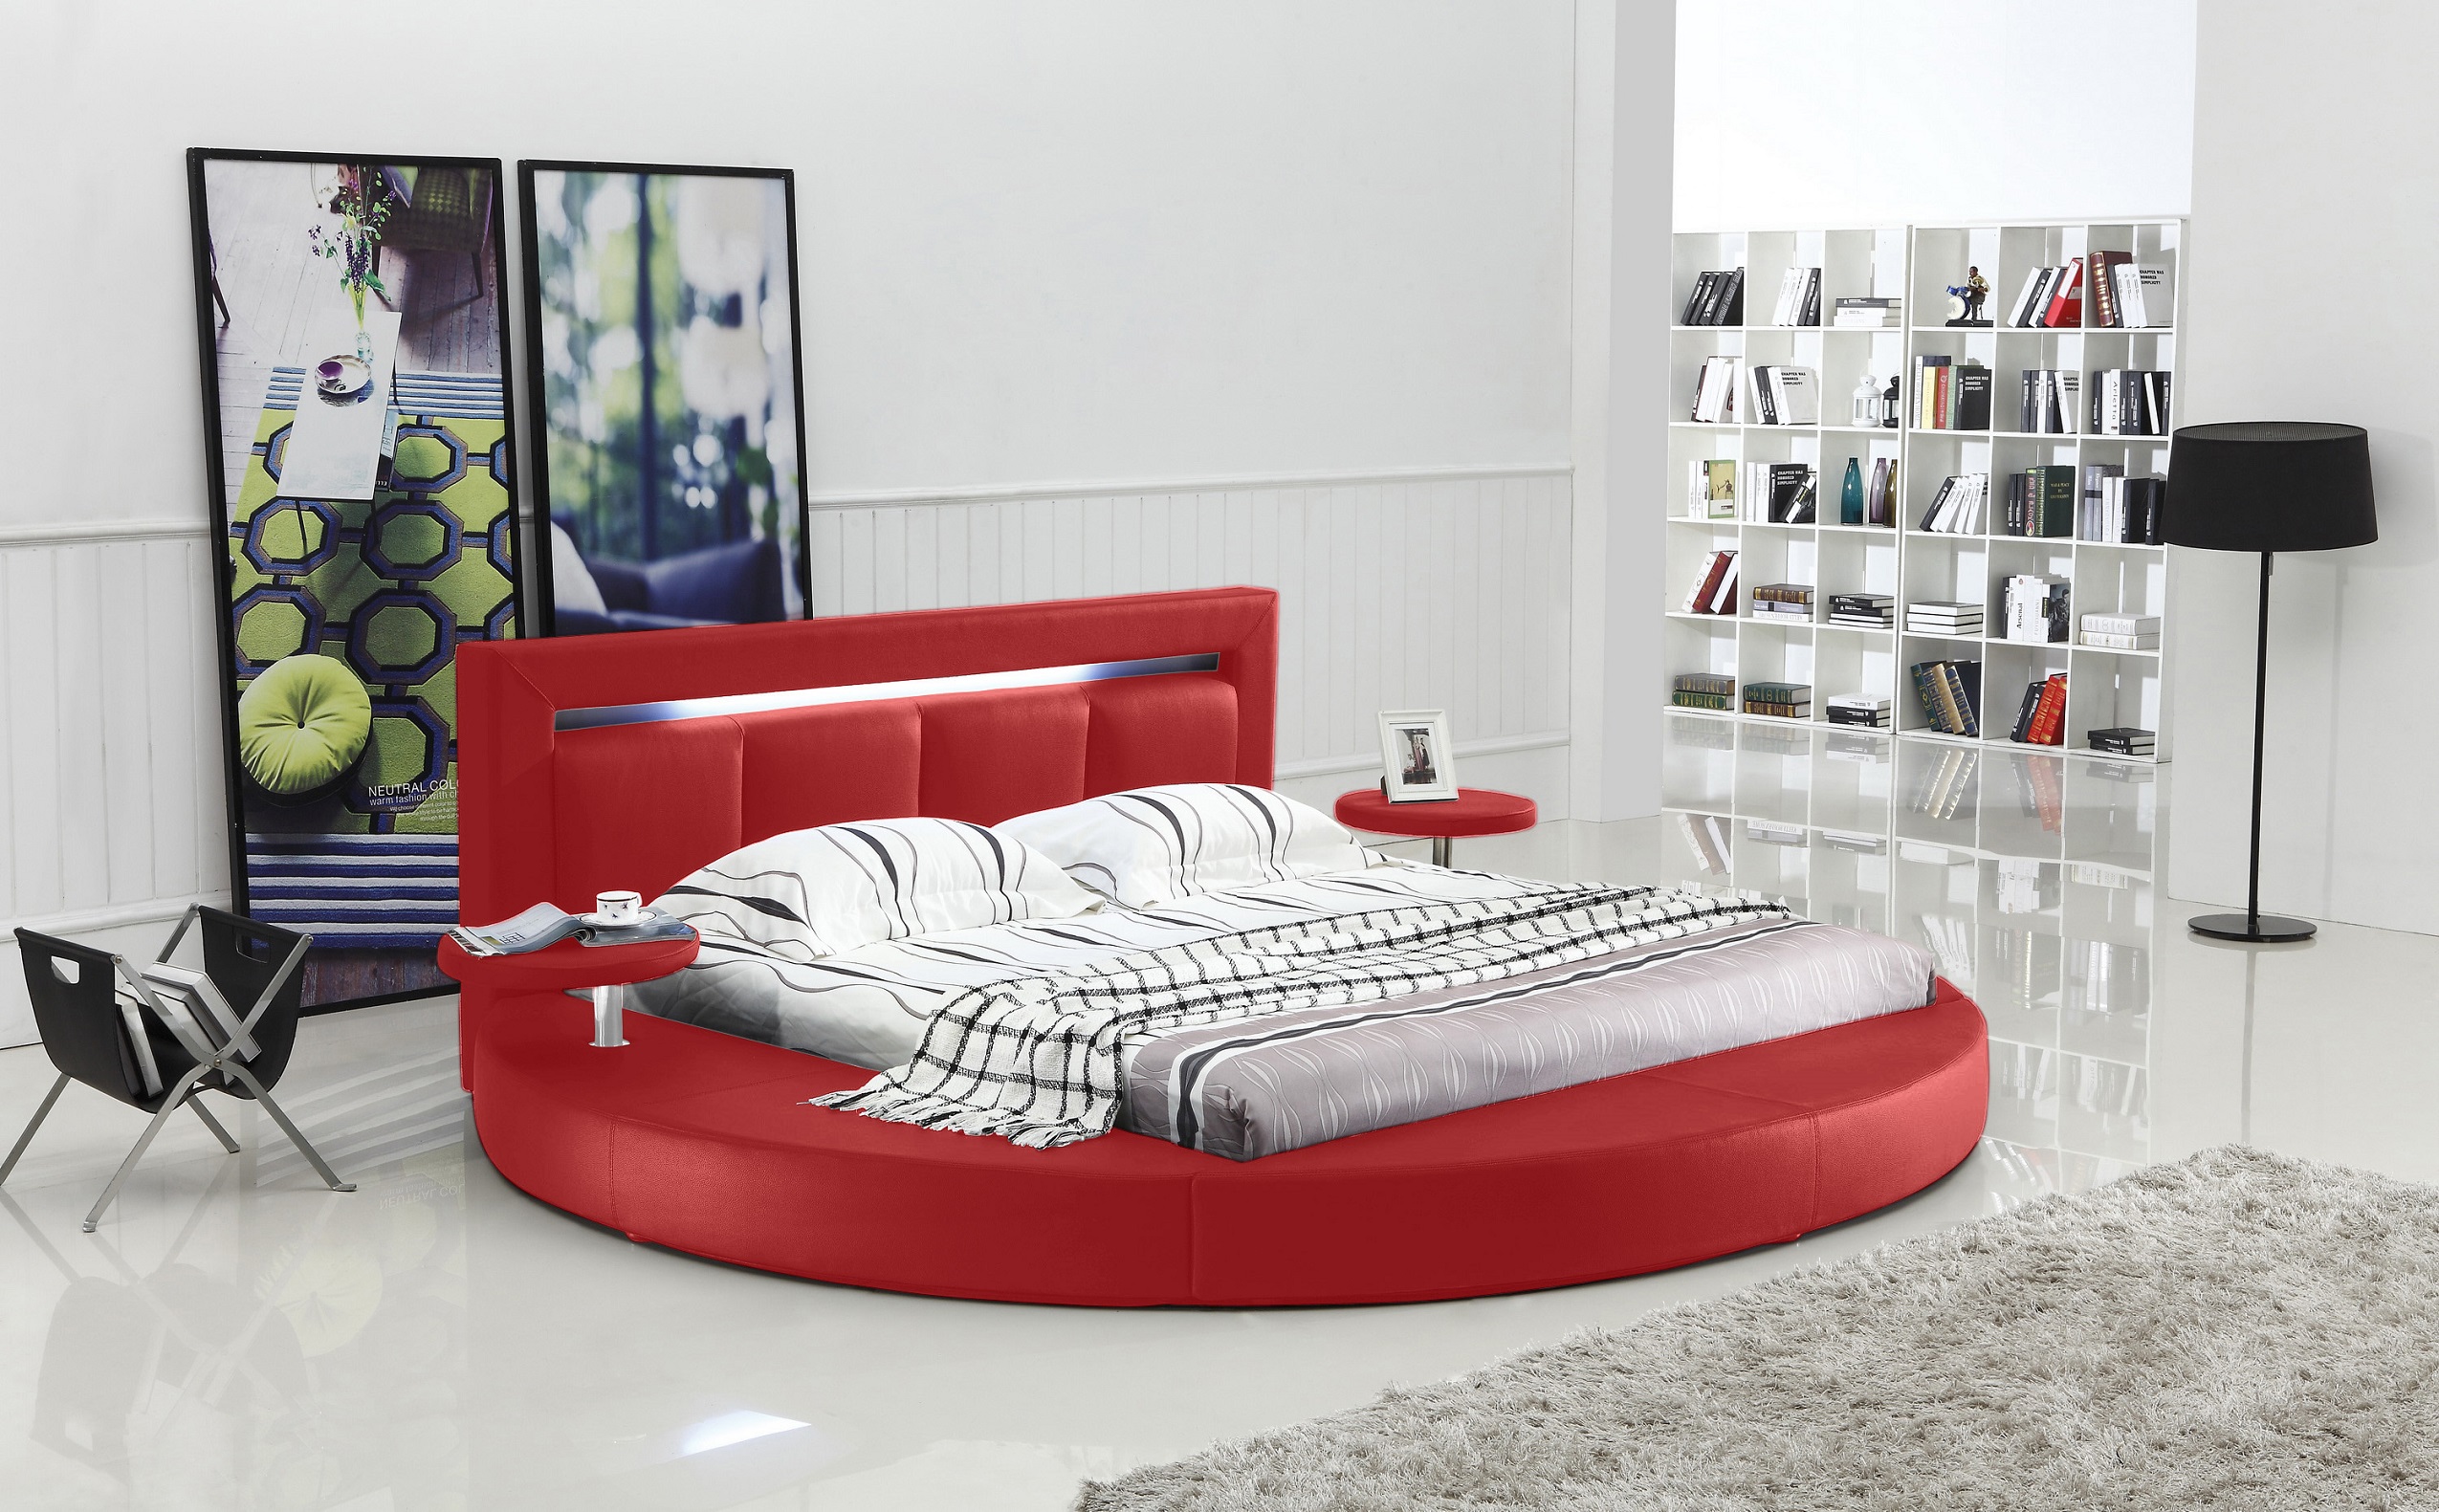 Oslo Round Bed With Headboard Lights, Red Leather Bed